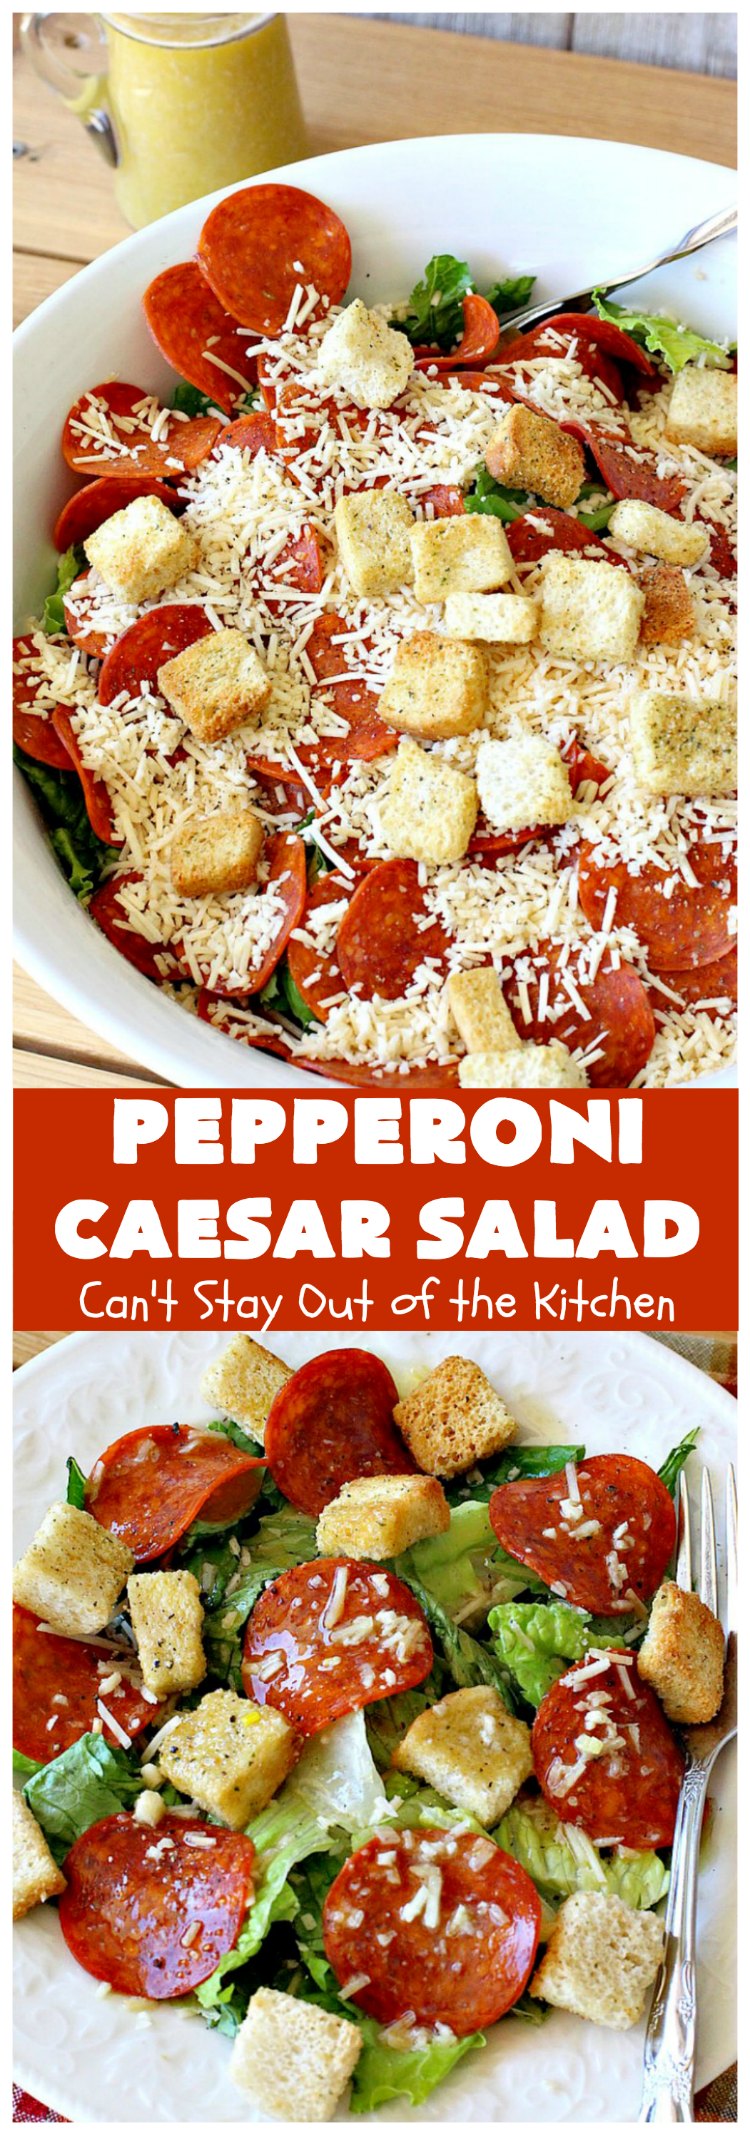 Pepperoni Caesar Salad | Can't Stay Out of the Kitchen